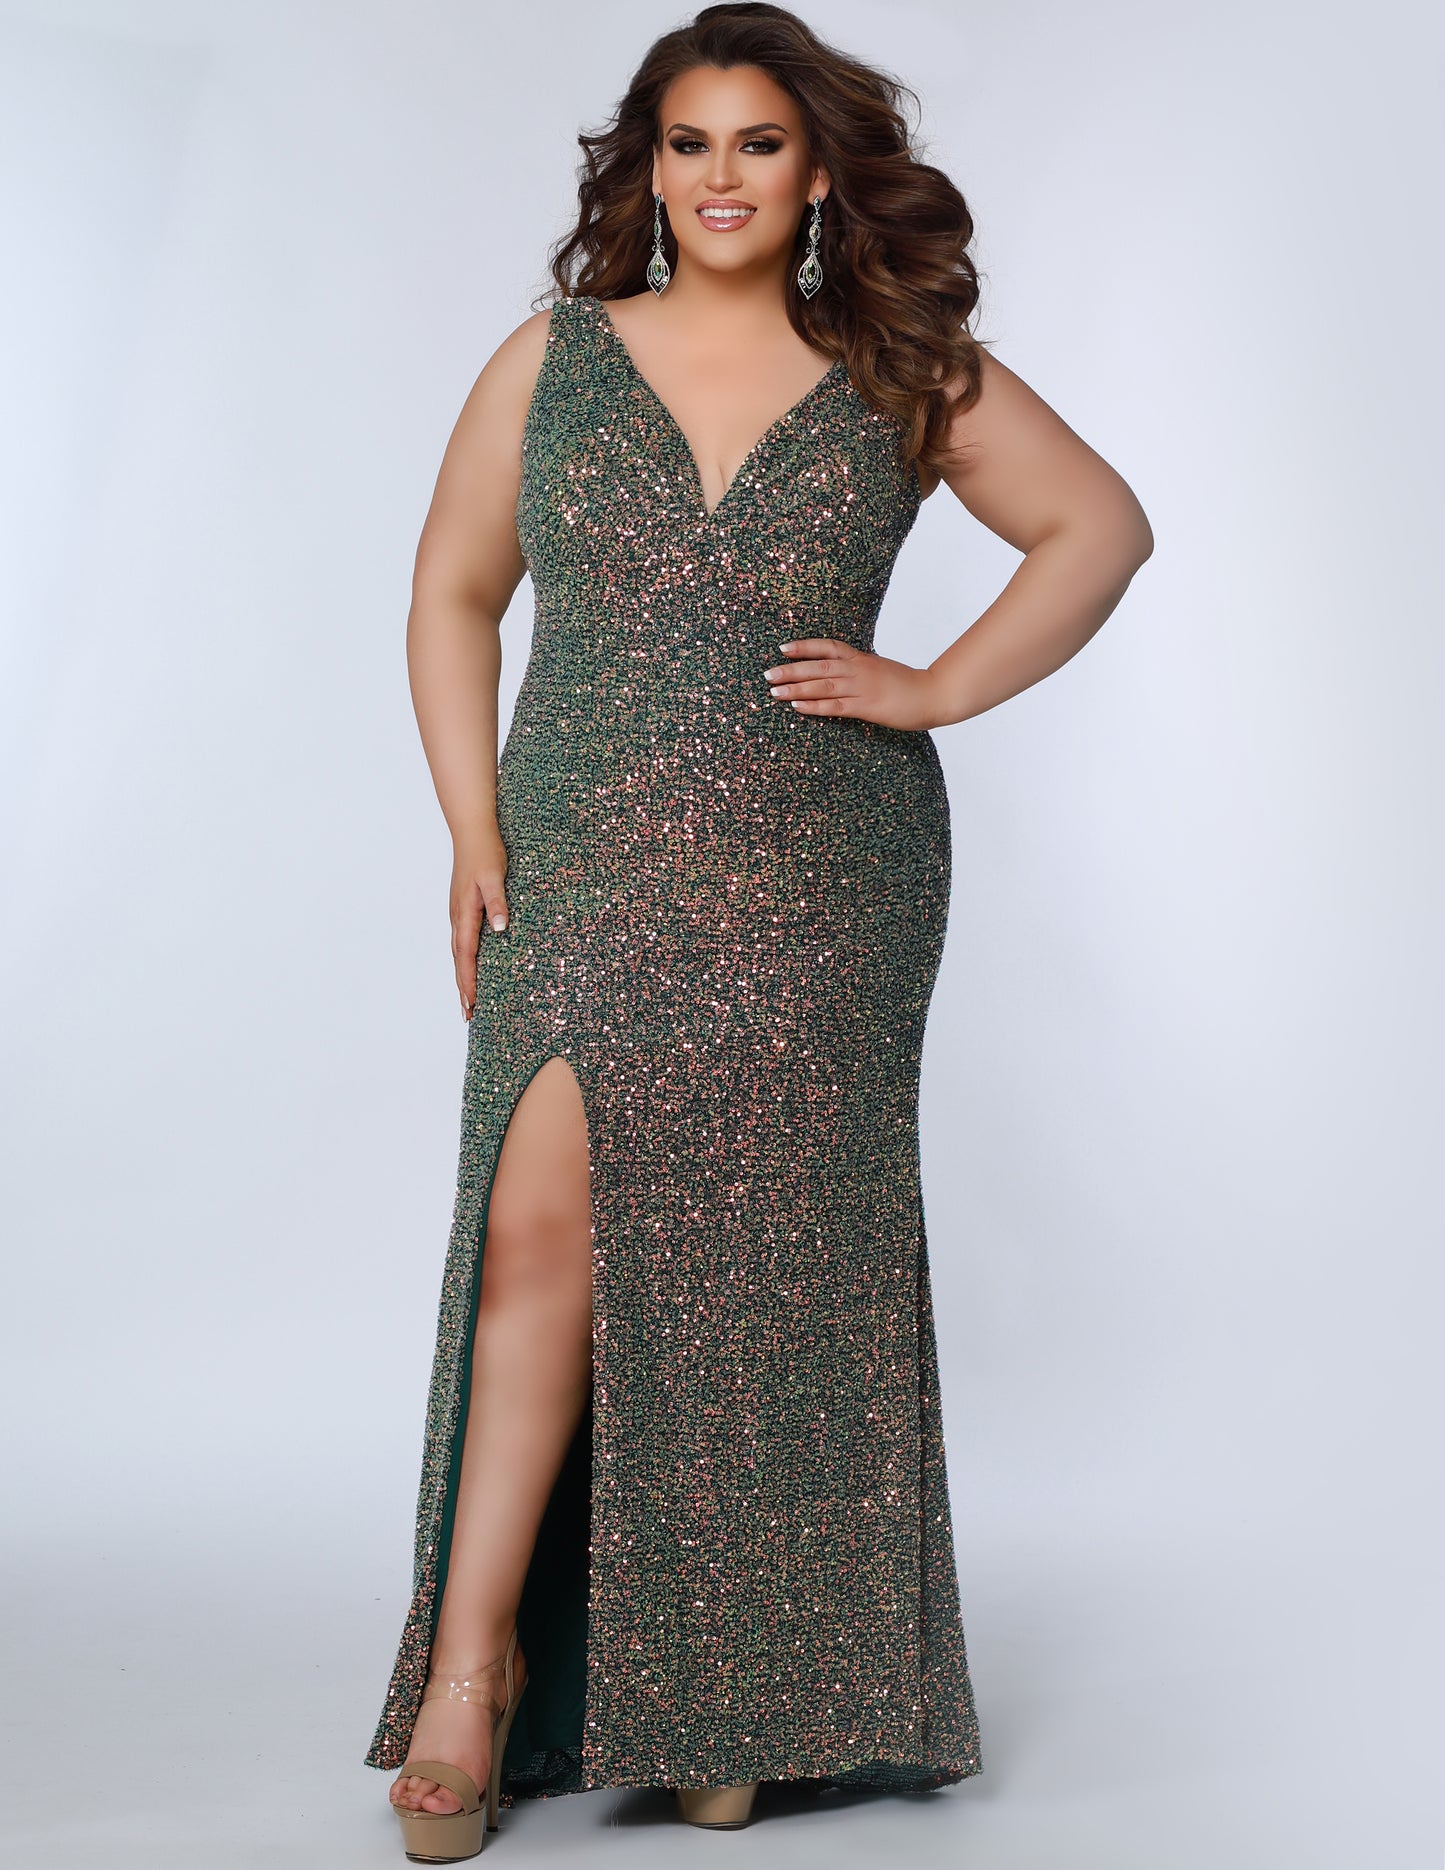 Treat yourself to a little elegant vibes in Sydney's Closet SC7339 Sleeveless Plus-Sized Prom Dress! With a V-Neckline and long-gown silhouette, you’re sure to be a showstopper. And, with a slit added to the mix, you're sure to be doin' the most on the dance floor. Puttin' on the glitz has never been so easy!